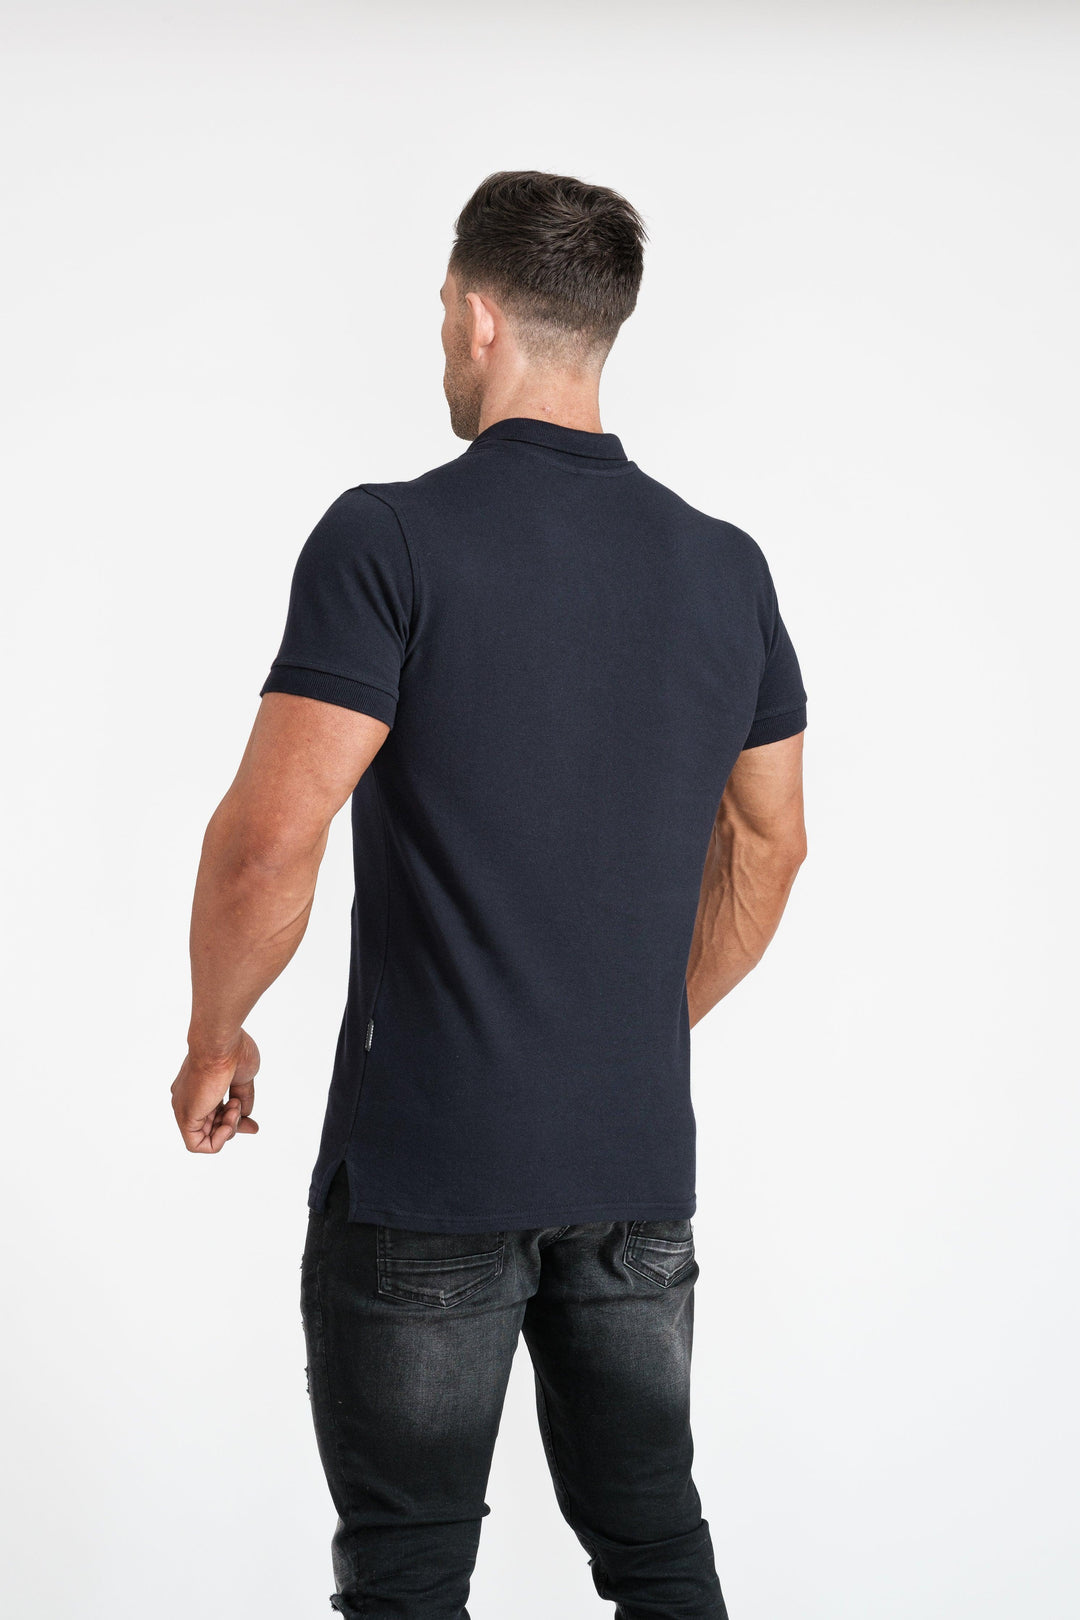 Navy Muscle Fit Polo Short sleeve. A Proportionally Fitted and Muscle Fit Polo. Ideal for muscular guys.